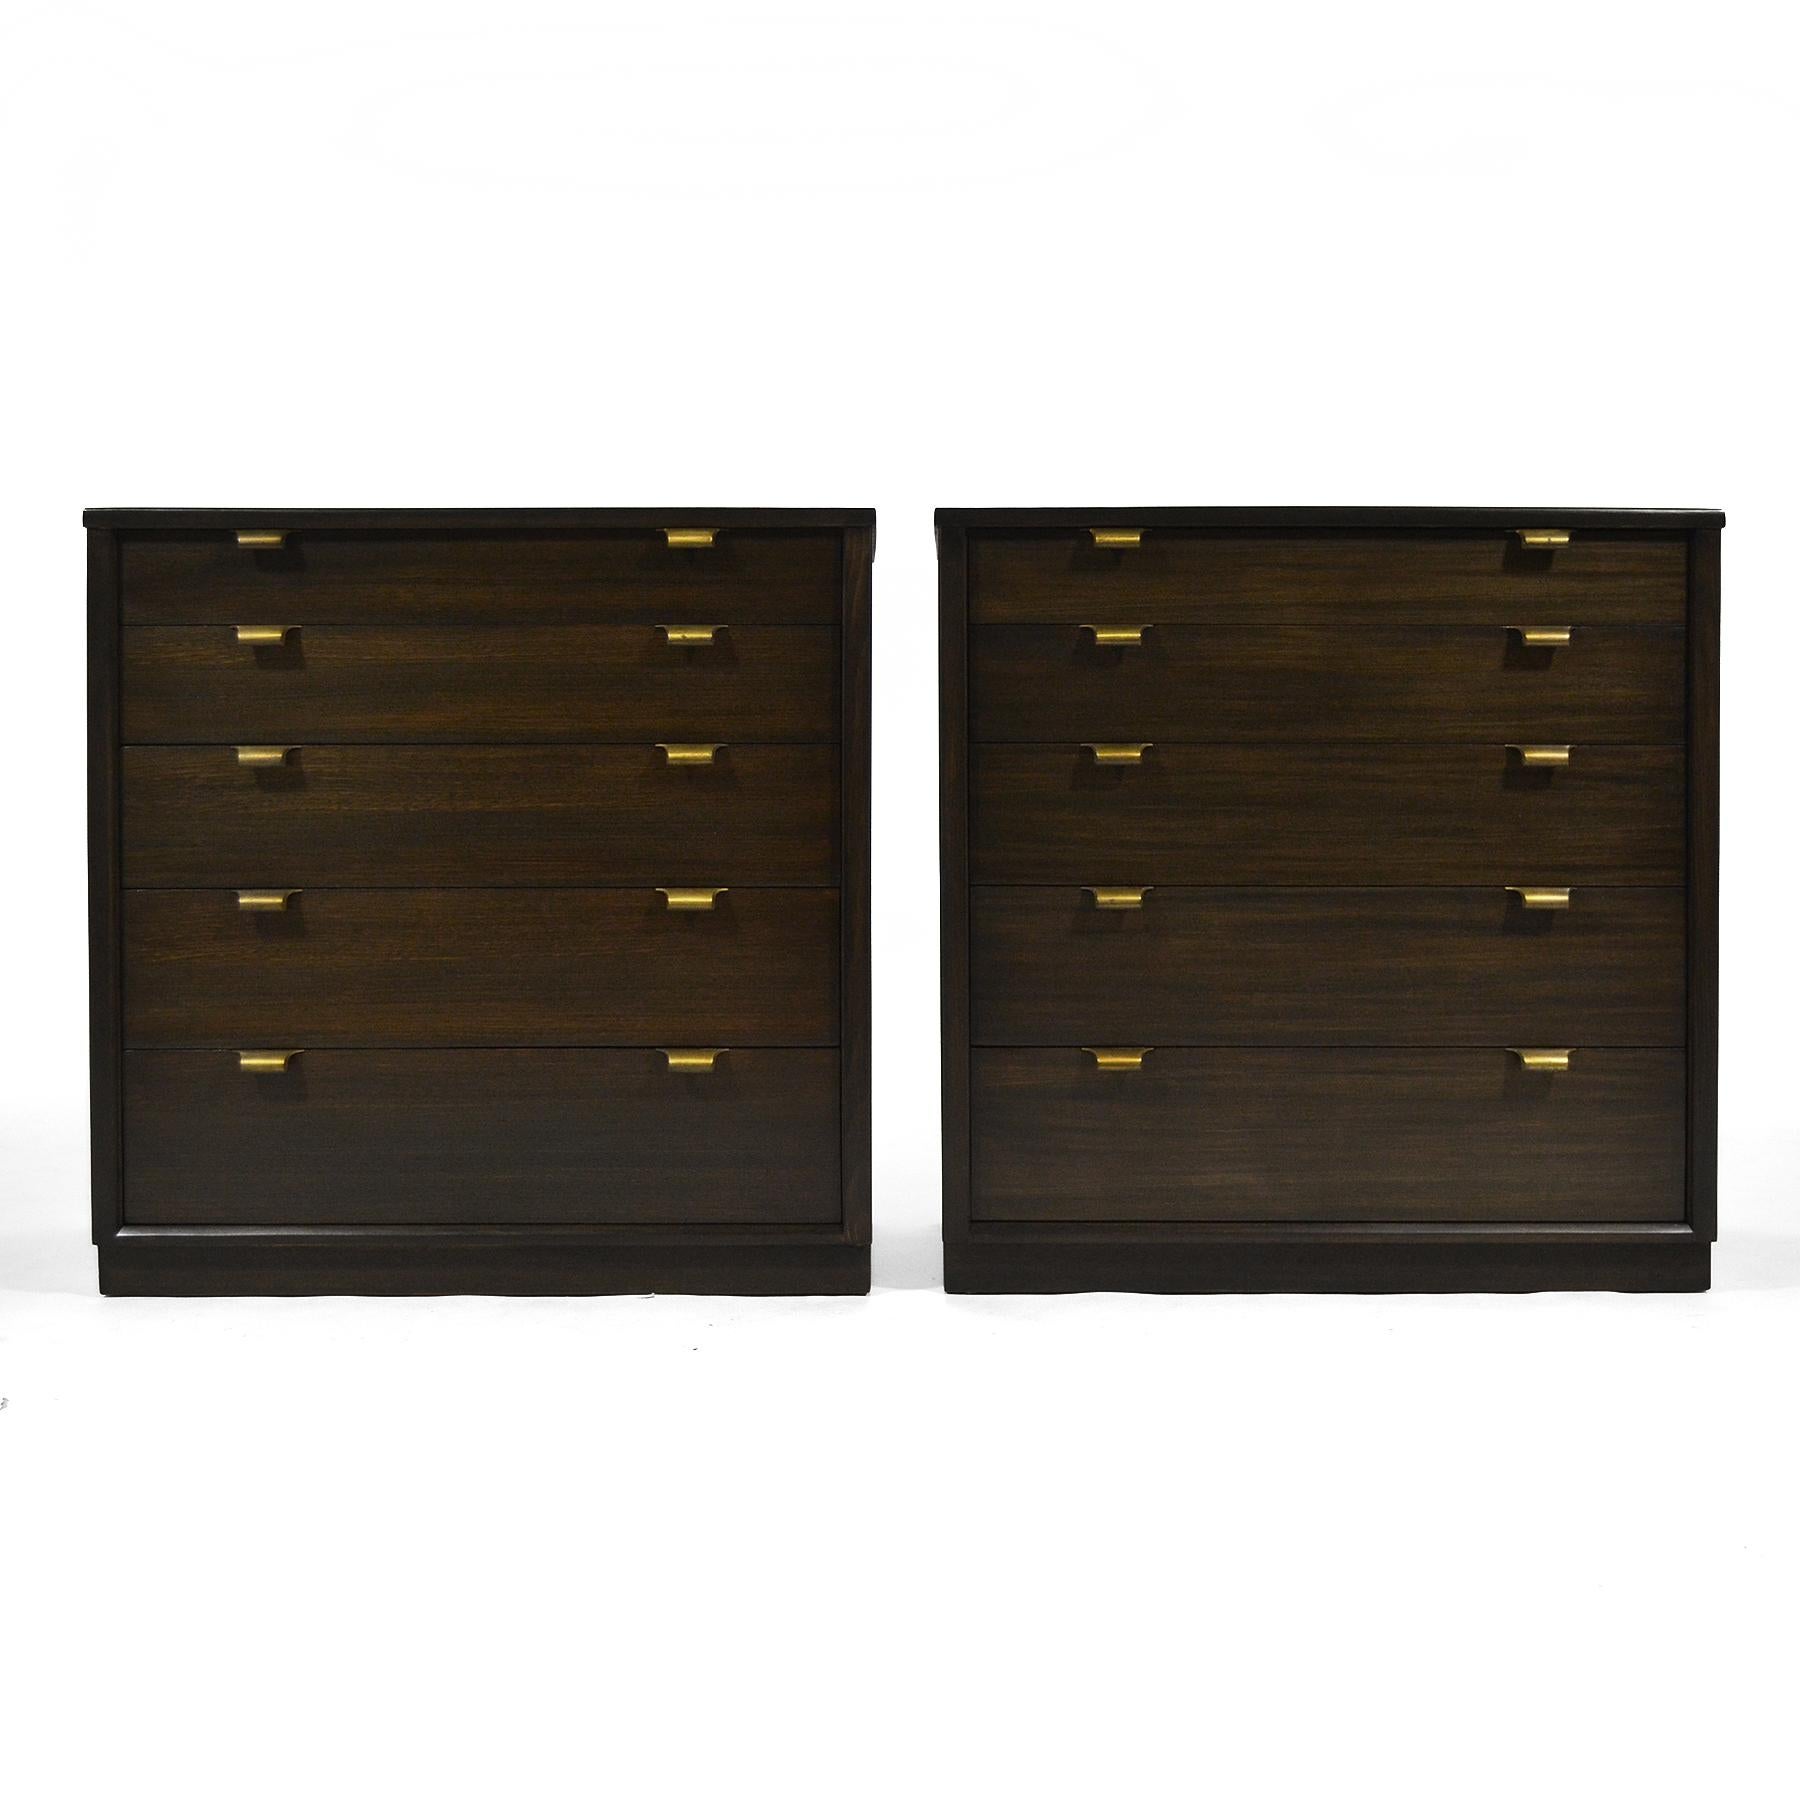 This pair of dressers from Edward Wormley's 